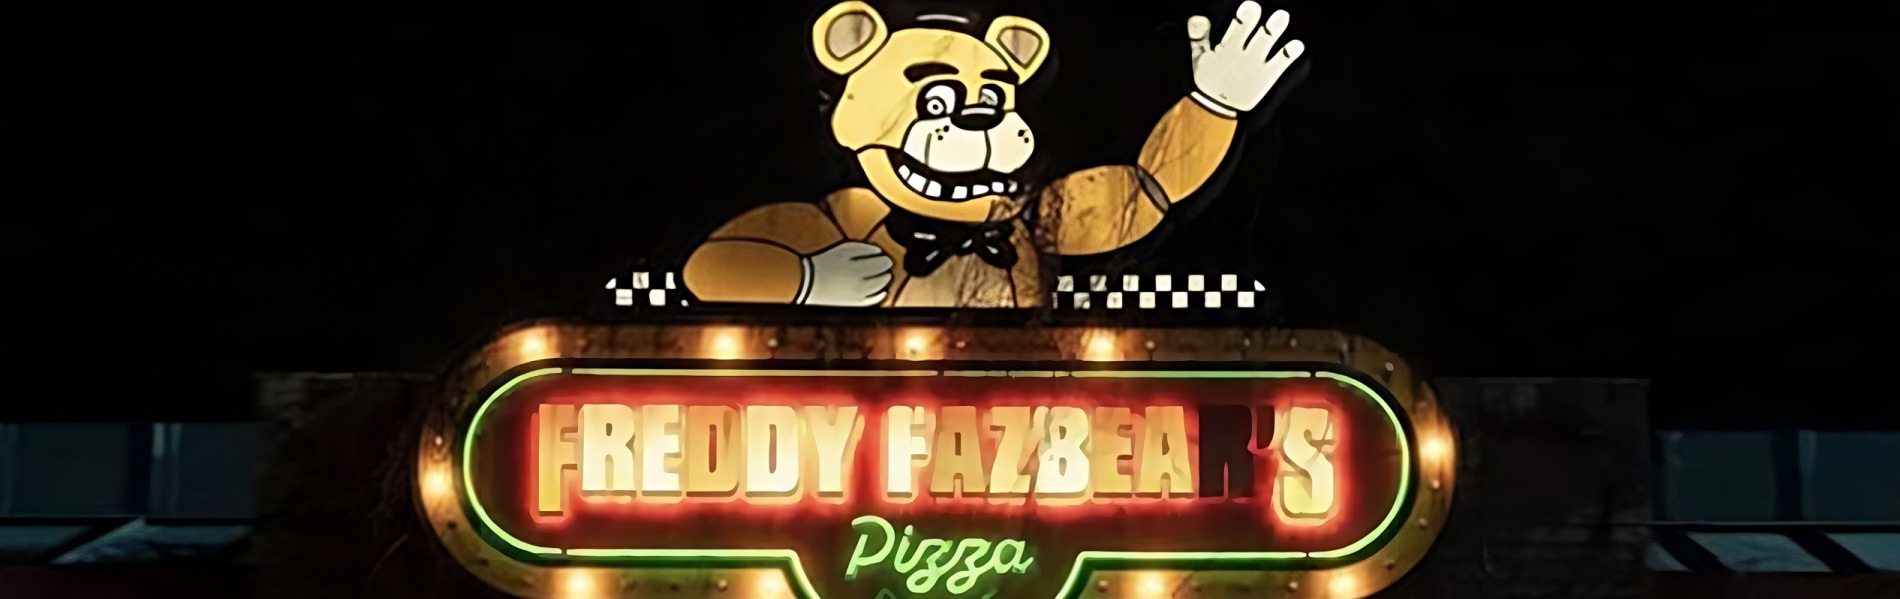 56 Five Nights at Freddy's ideas  five nights at freddy's, five night,  freddy